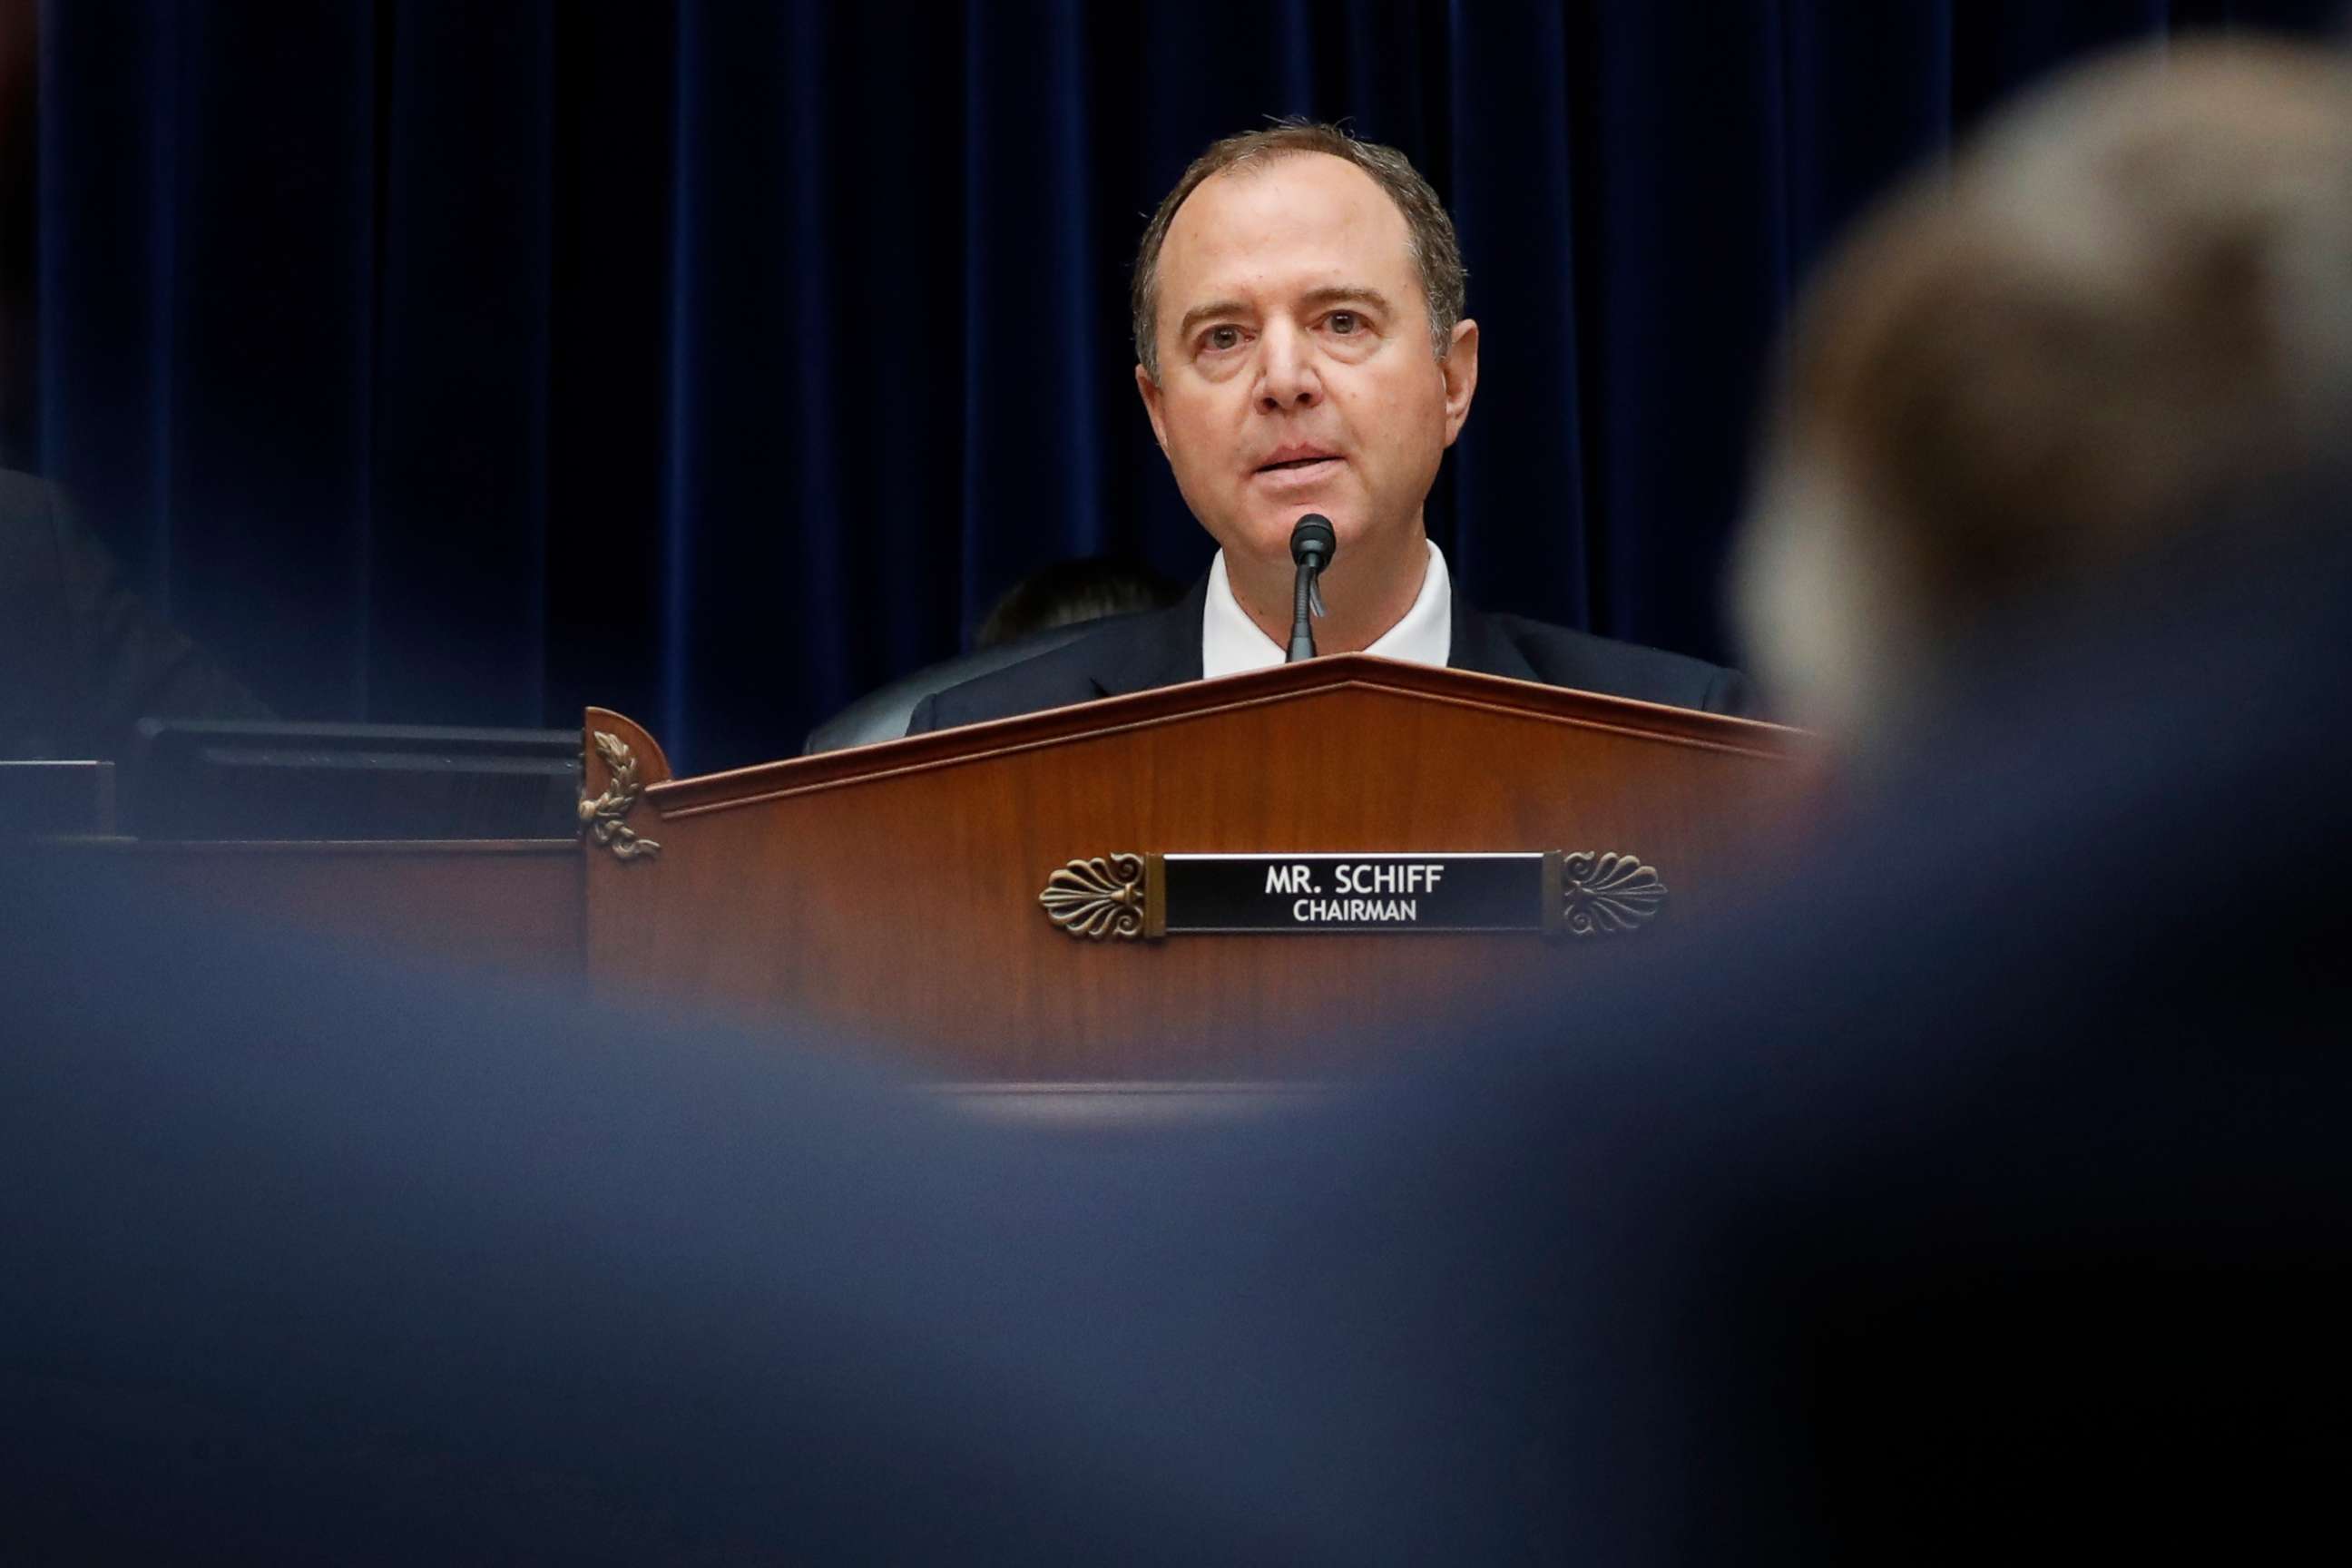 PHOTO: House Intelligence Committee Chairman Rep. Adam Schiff questions Acting Director of National Intelligence Joseph Maguire, as he testifies before the House Intelligence Committee on Capitol Hill in Washington, D.C., Sept. 26, 2019.